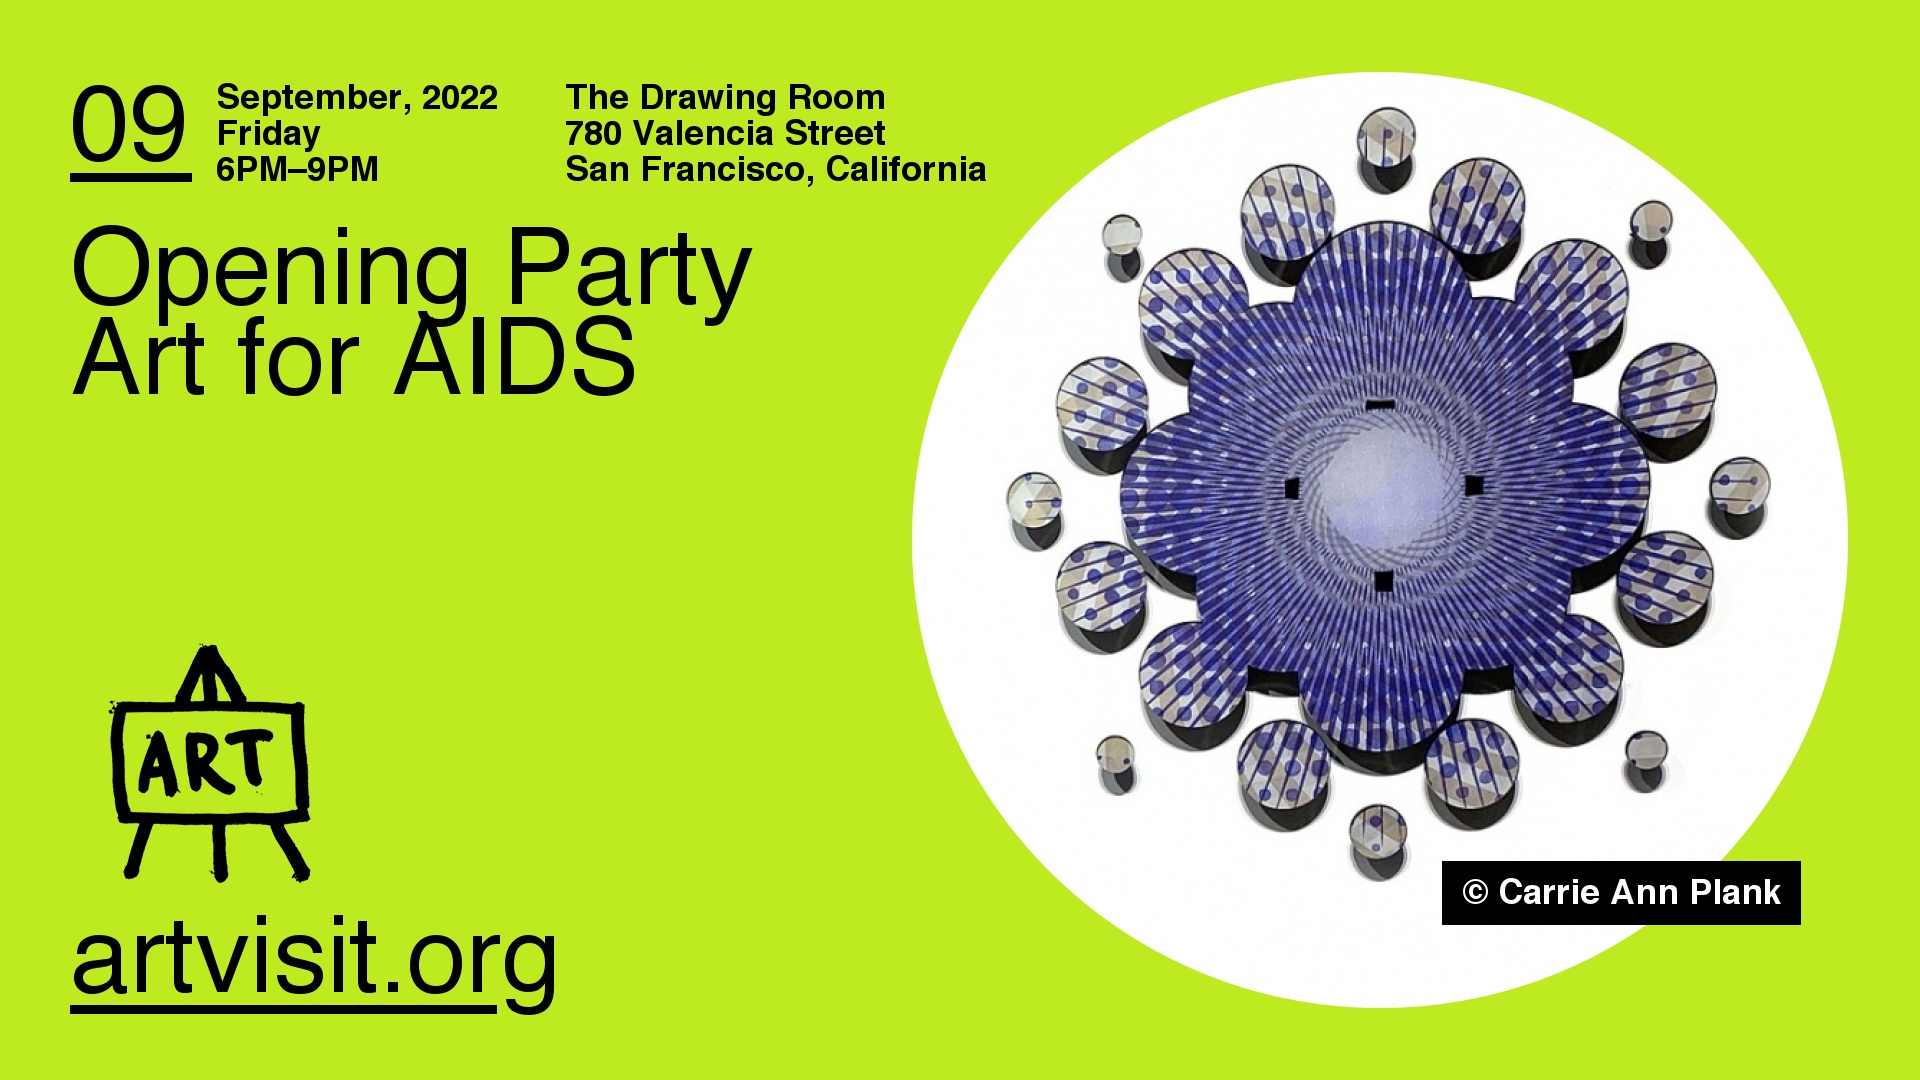 Opening Party Art for AIDS